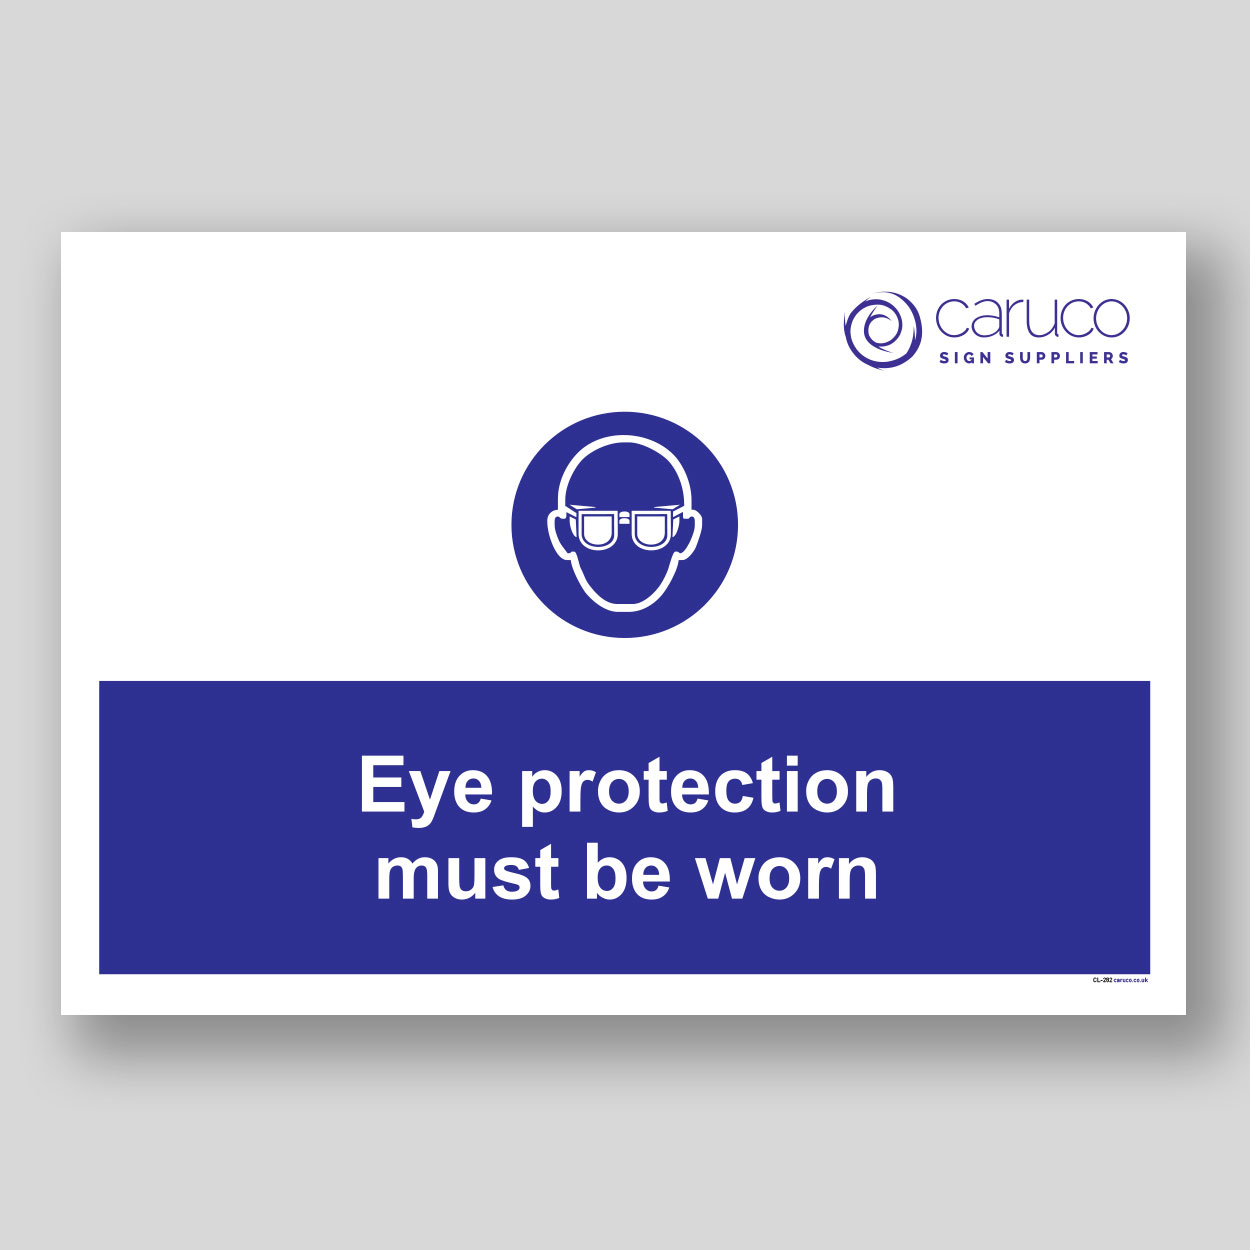 CL-282 Eye protection must be worn